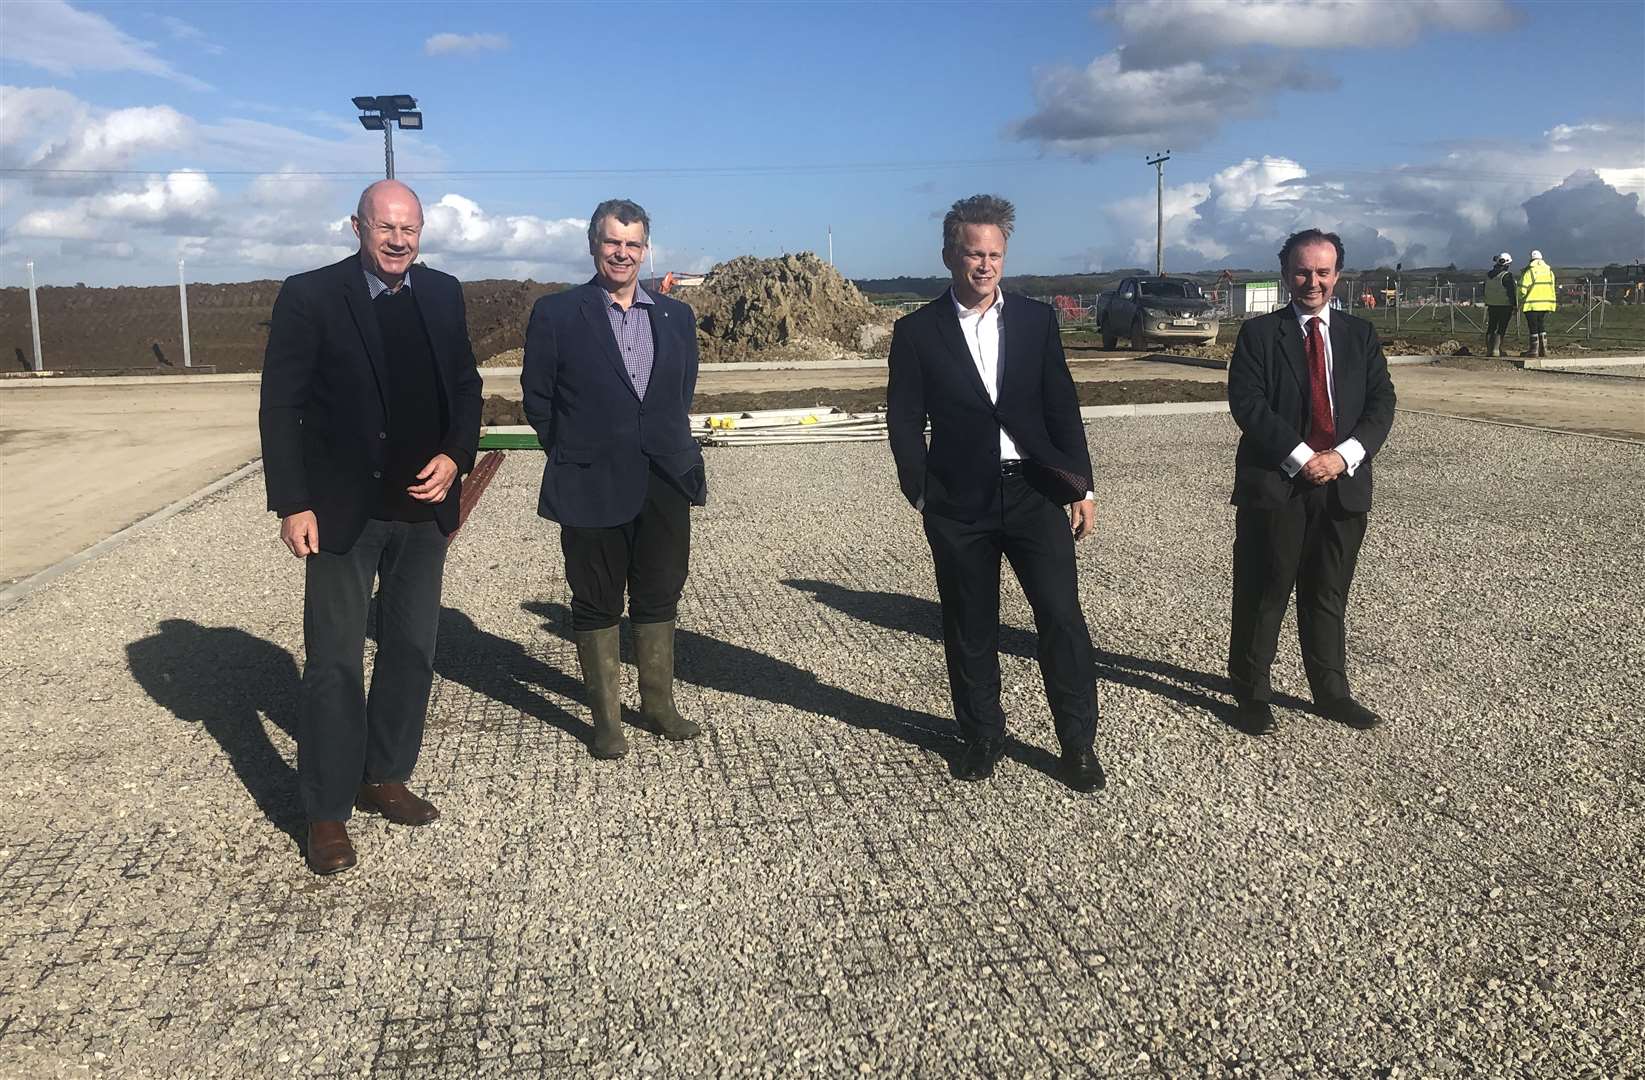 From left to right: MP Damian Green, ABC deputy leader Paul Bartlett, cabinet minister Grant Shapps and KCC leader Roger Gough during yesterday's visit